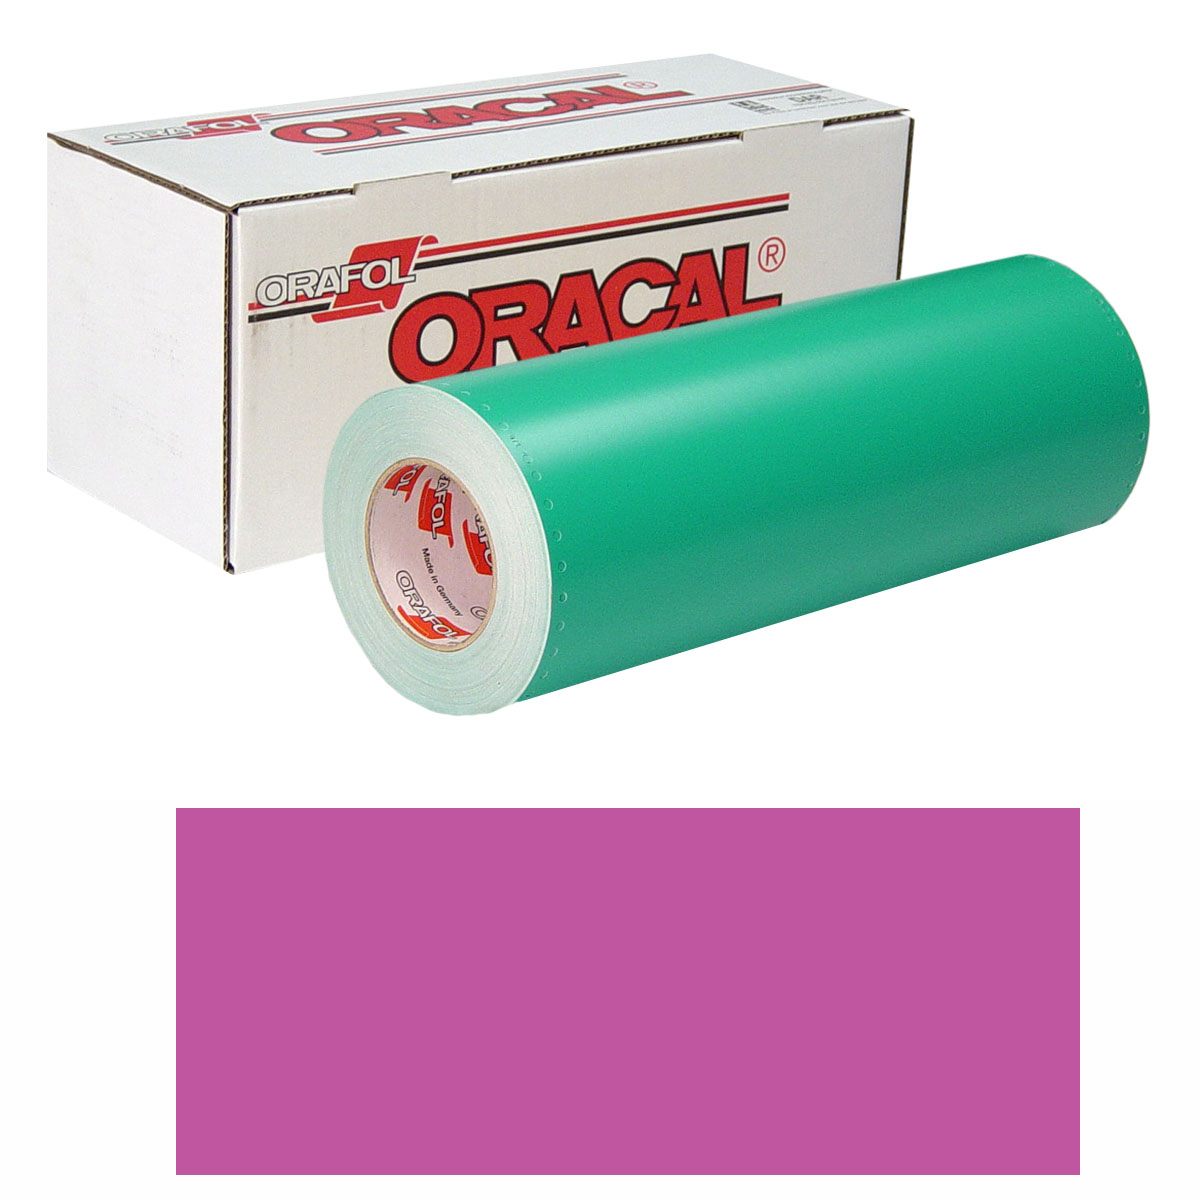 ORACAL 8500 30in X 10yd 413 Light Pink